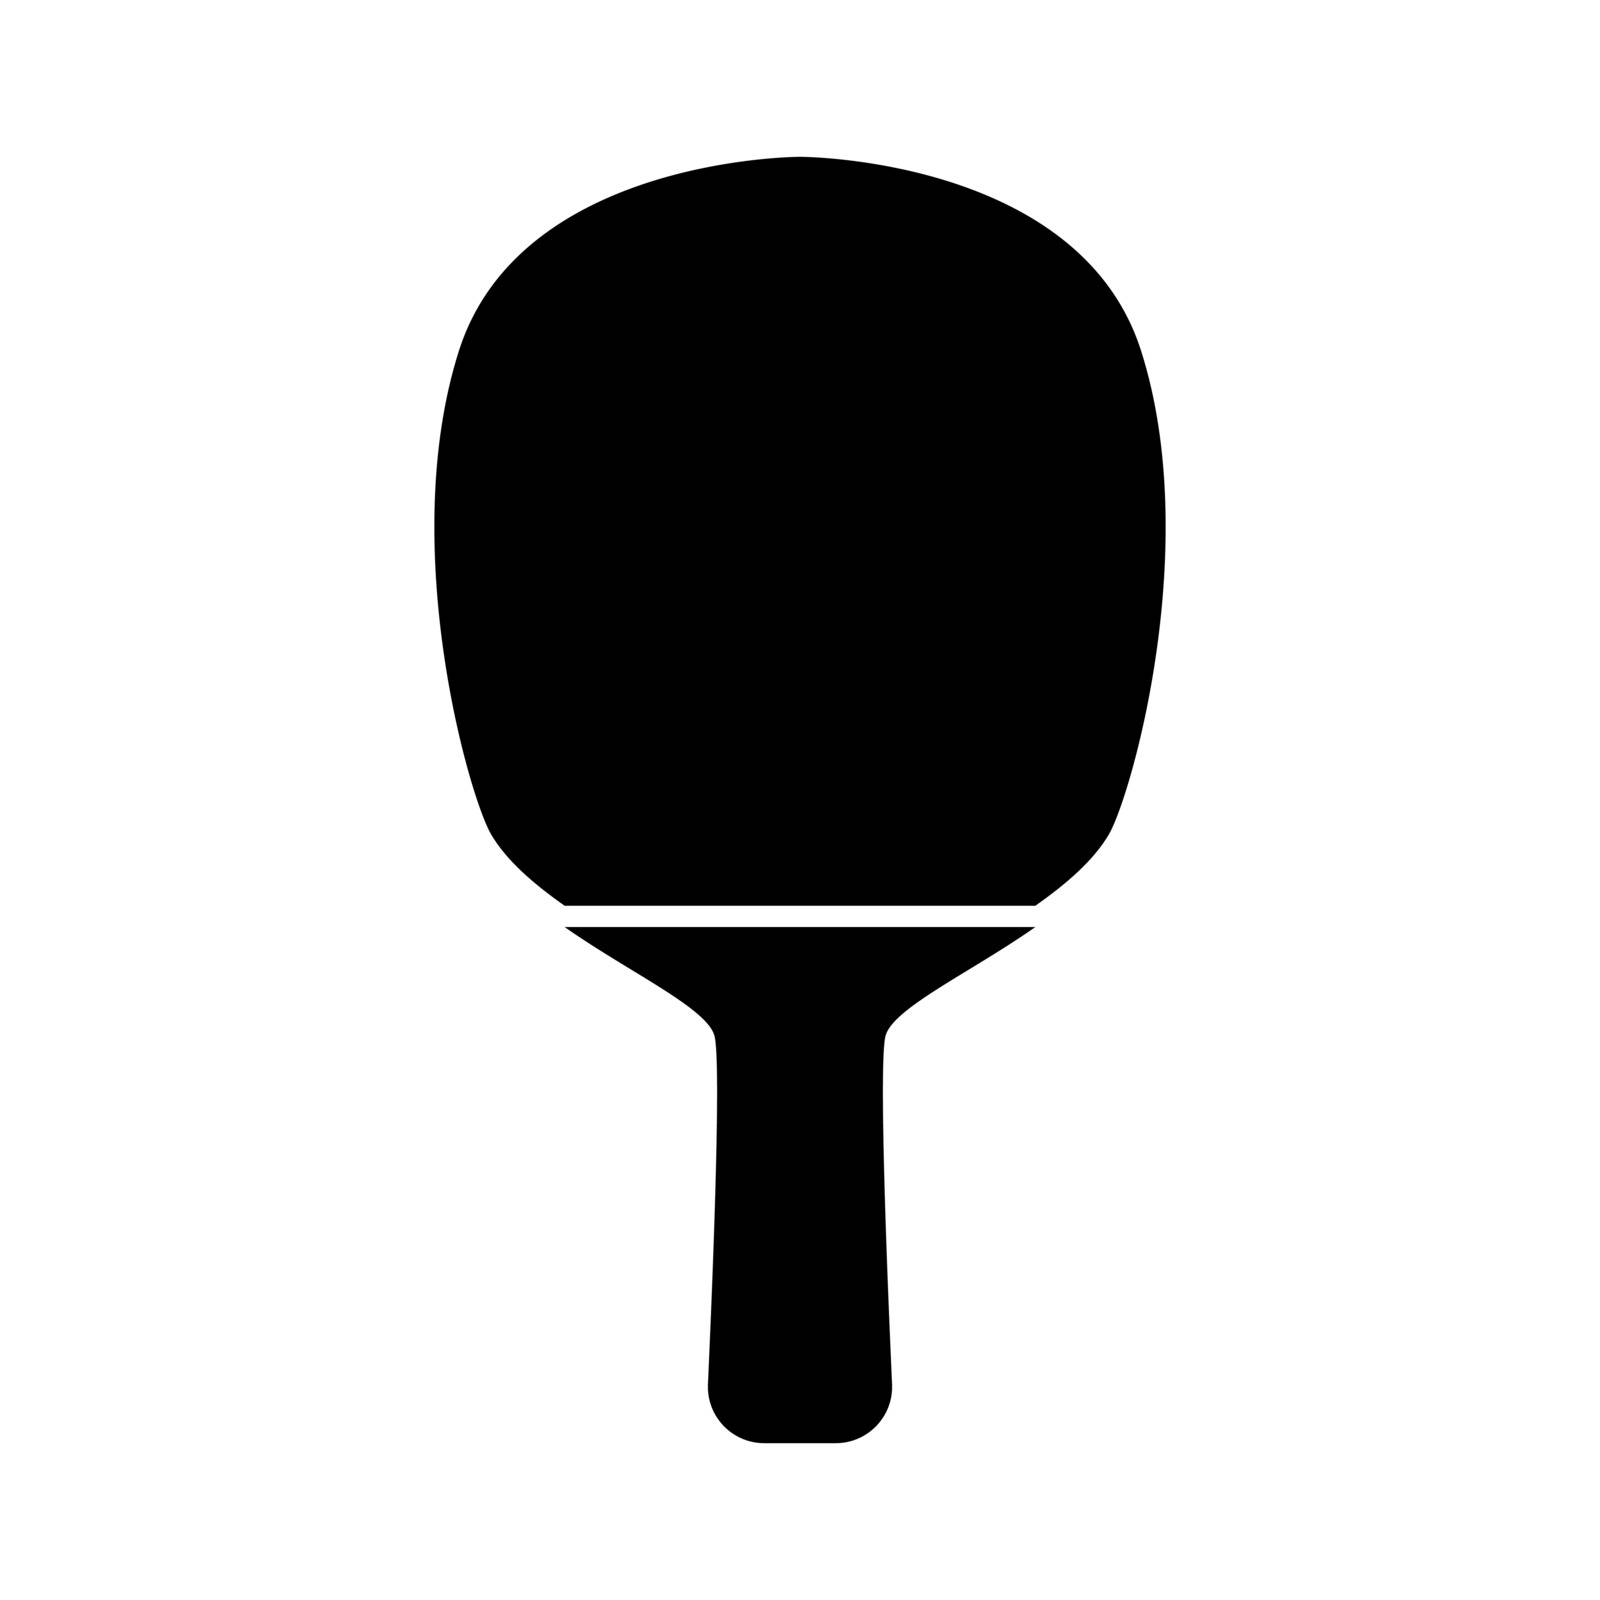 Rocket of a table tennis black icon . by serhii435